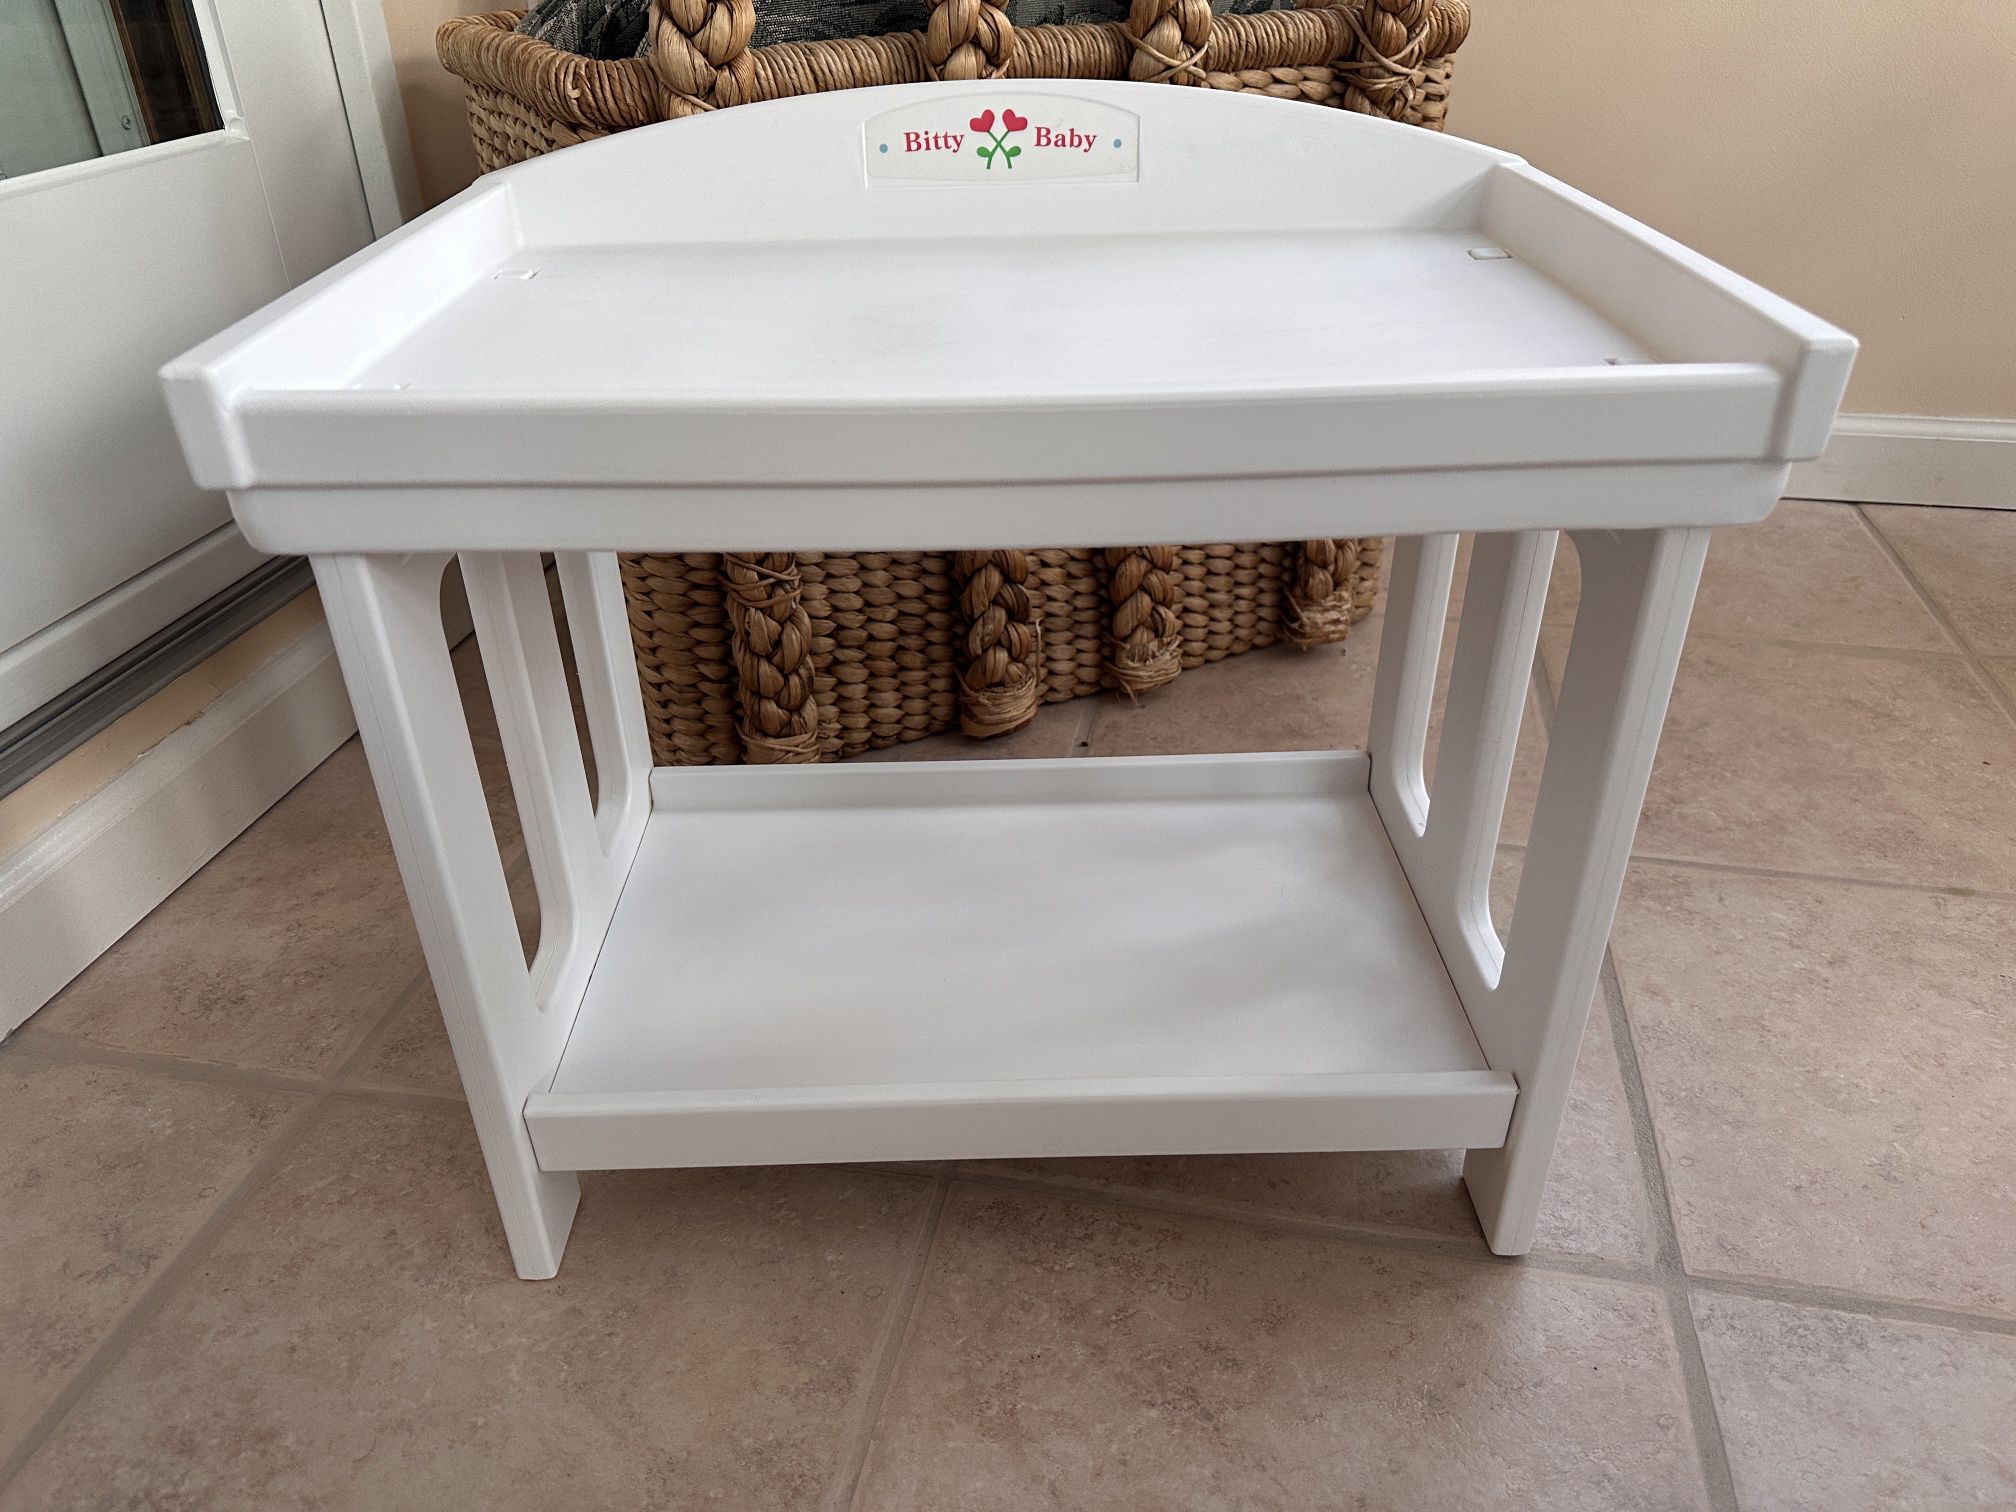 Bitty Baby Changing Table 